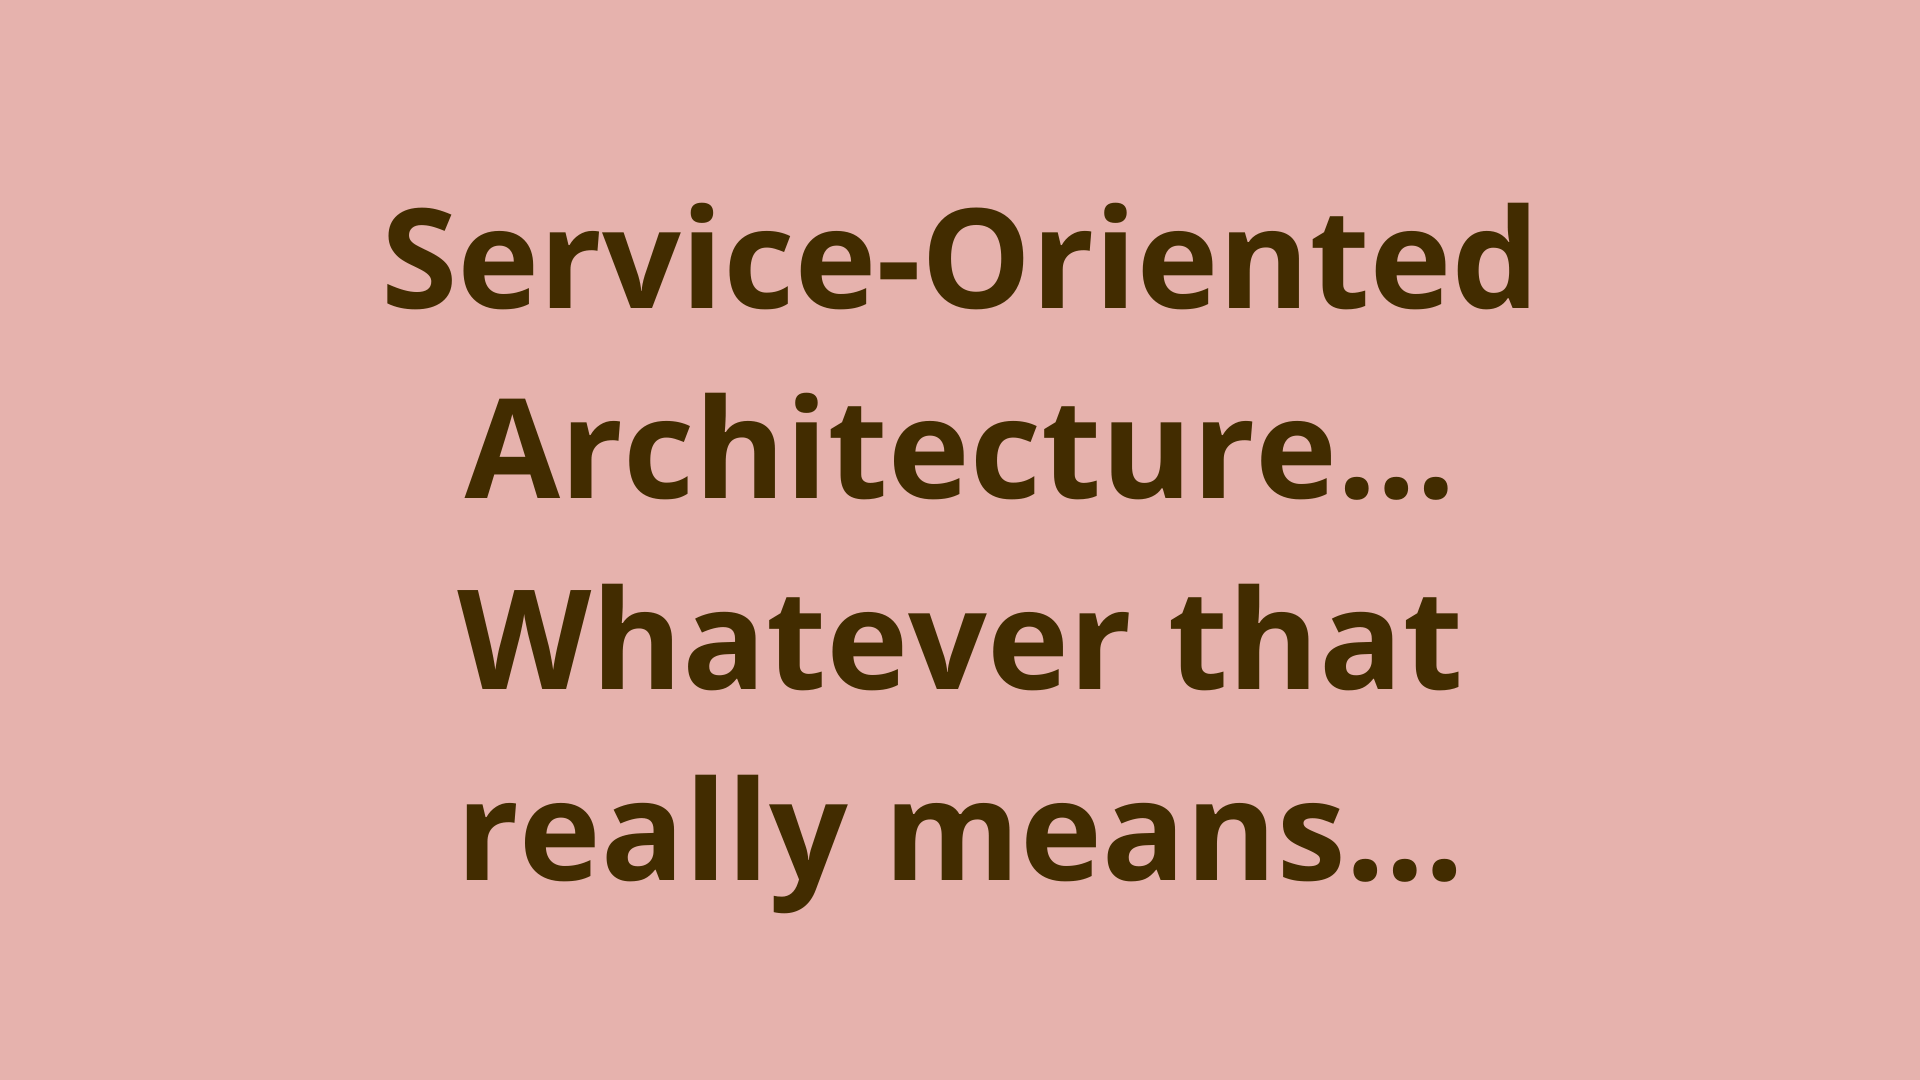 Image of Service-oriented architecture... whatever that really means...